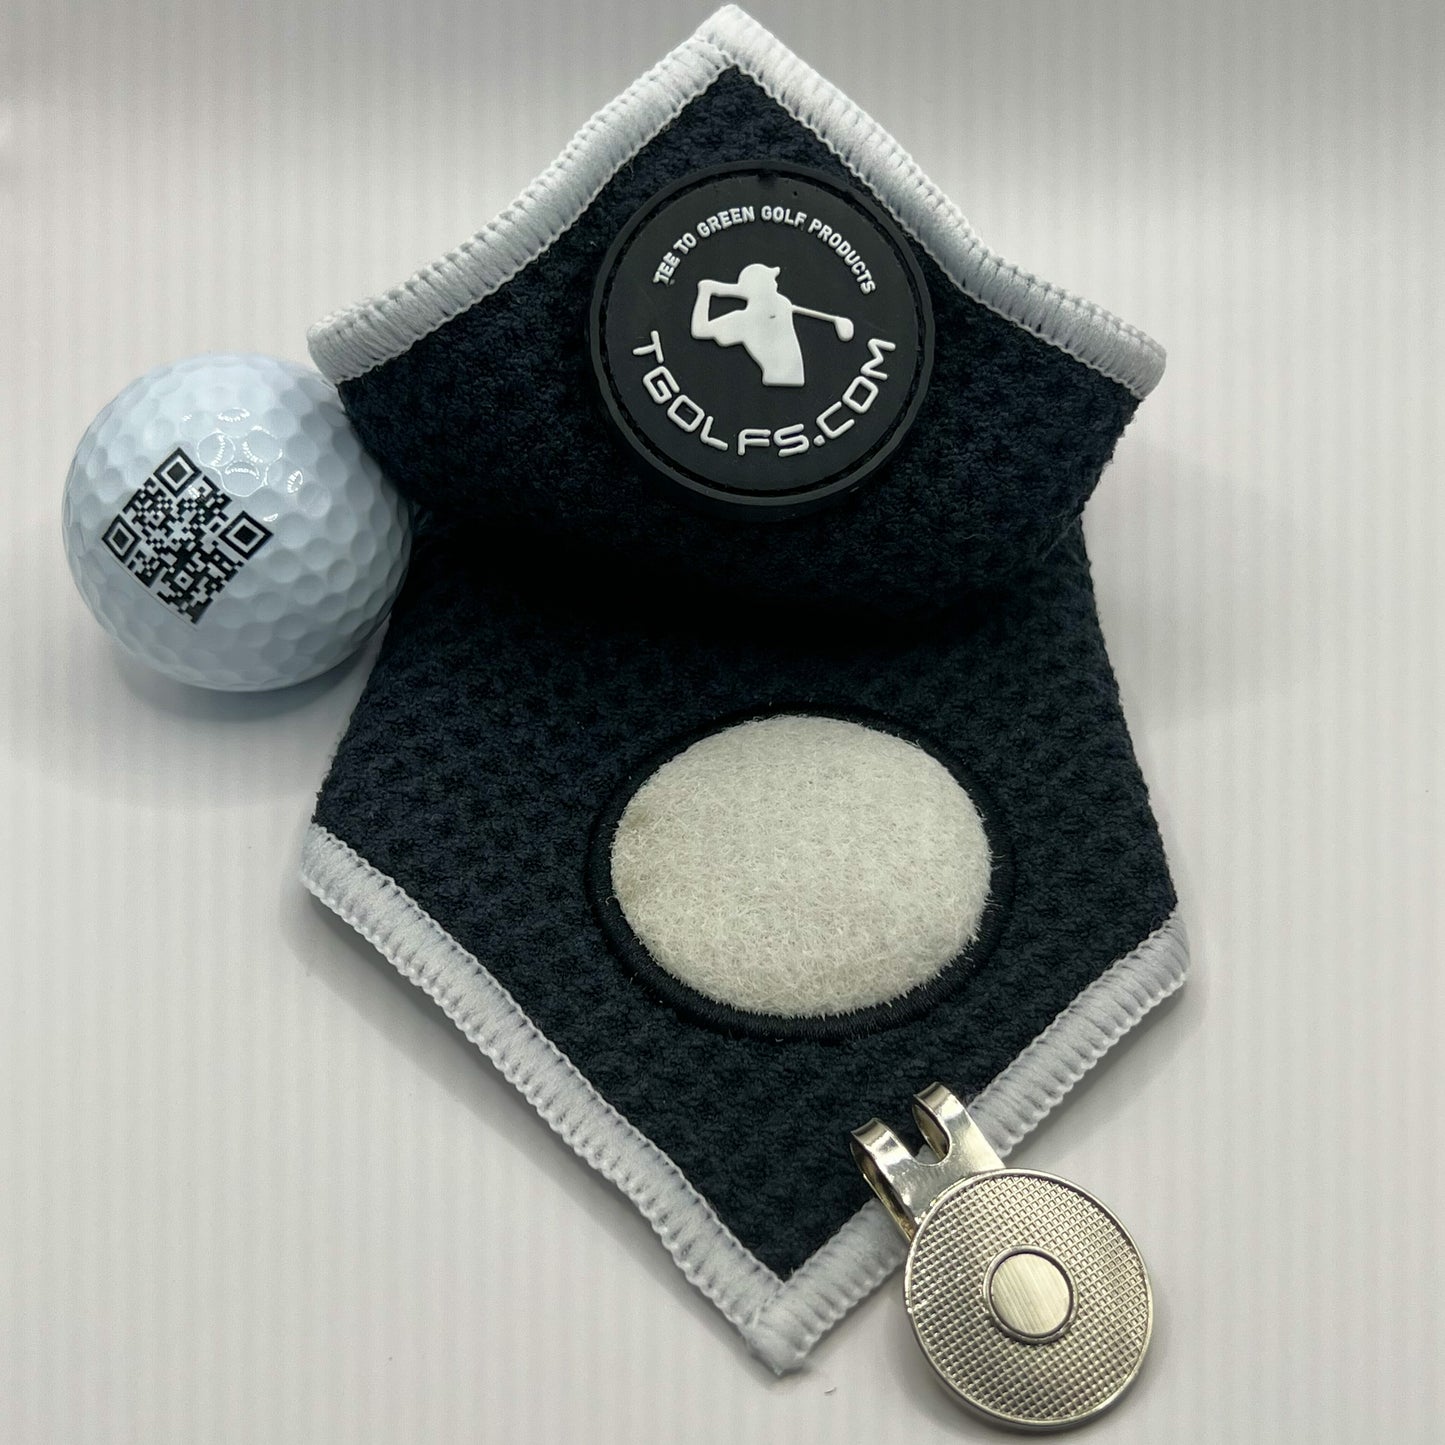 Image of the T-owel, a golf towel with a magnetic belt clip